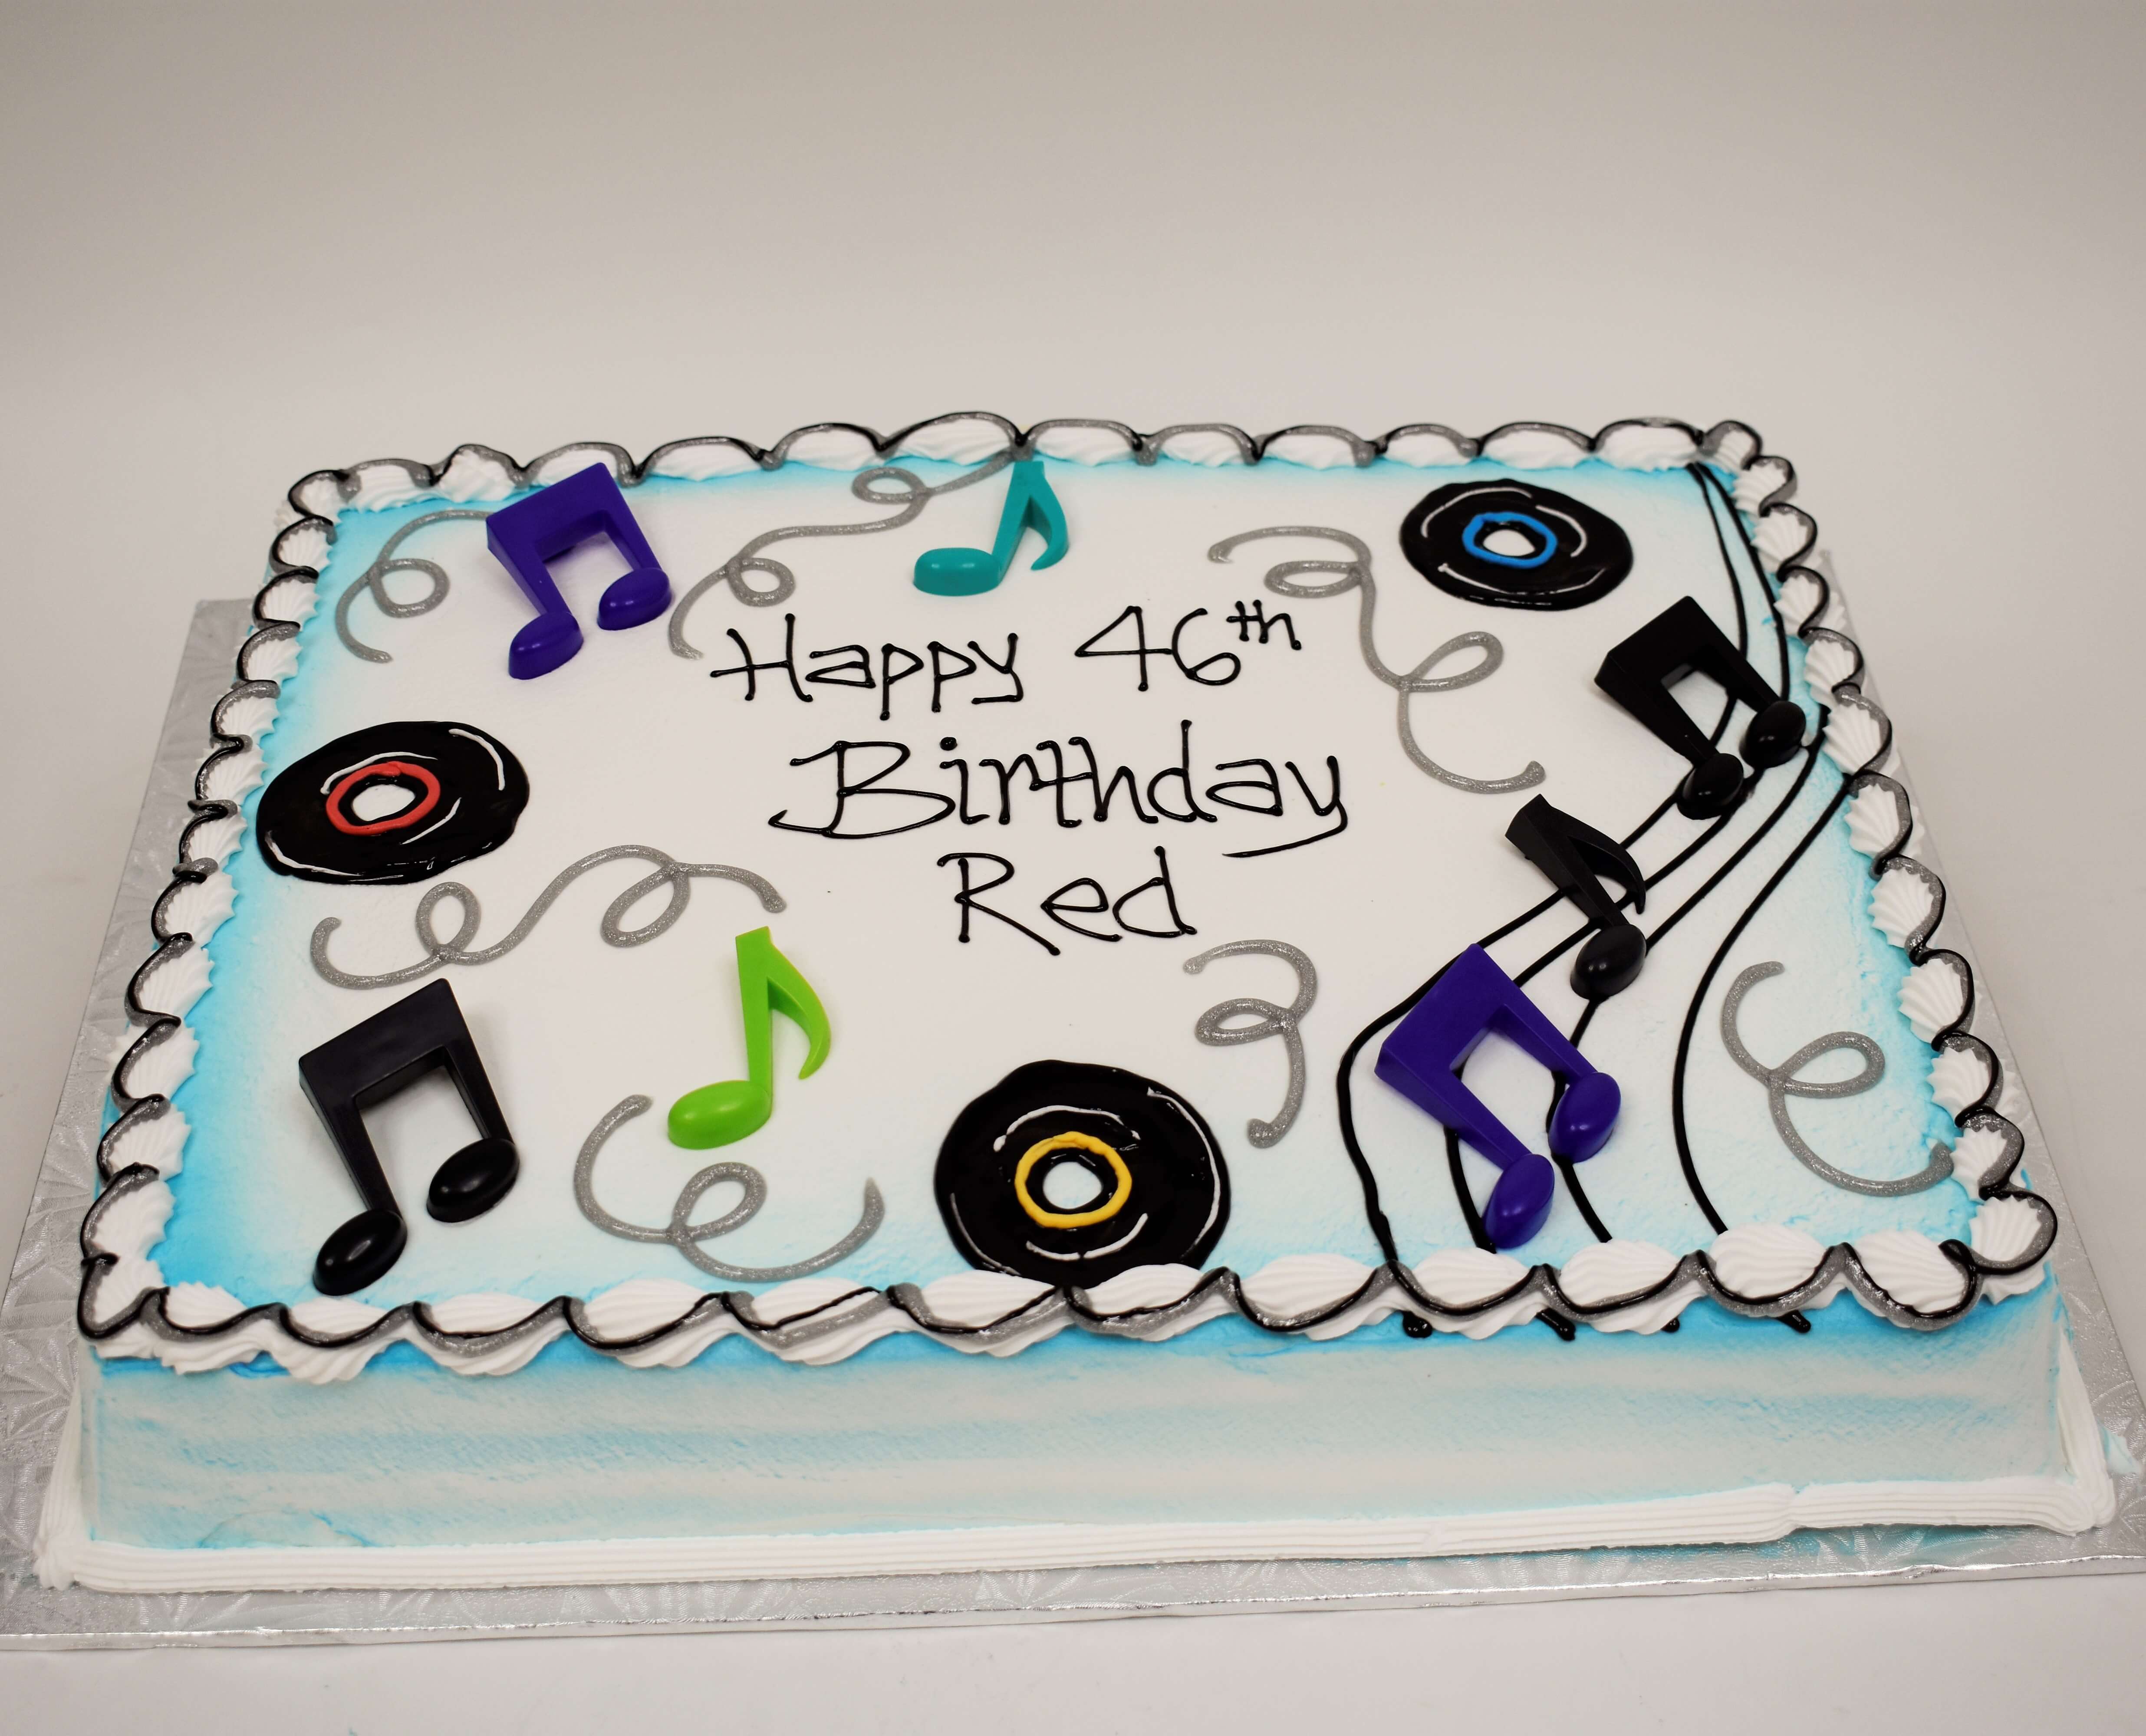 MaArthur's Bakery Custom Cake With Blue Airspray, Musical Notes, Records, Silver Swirls